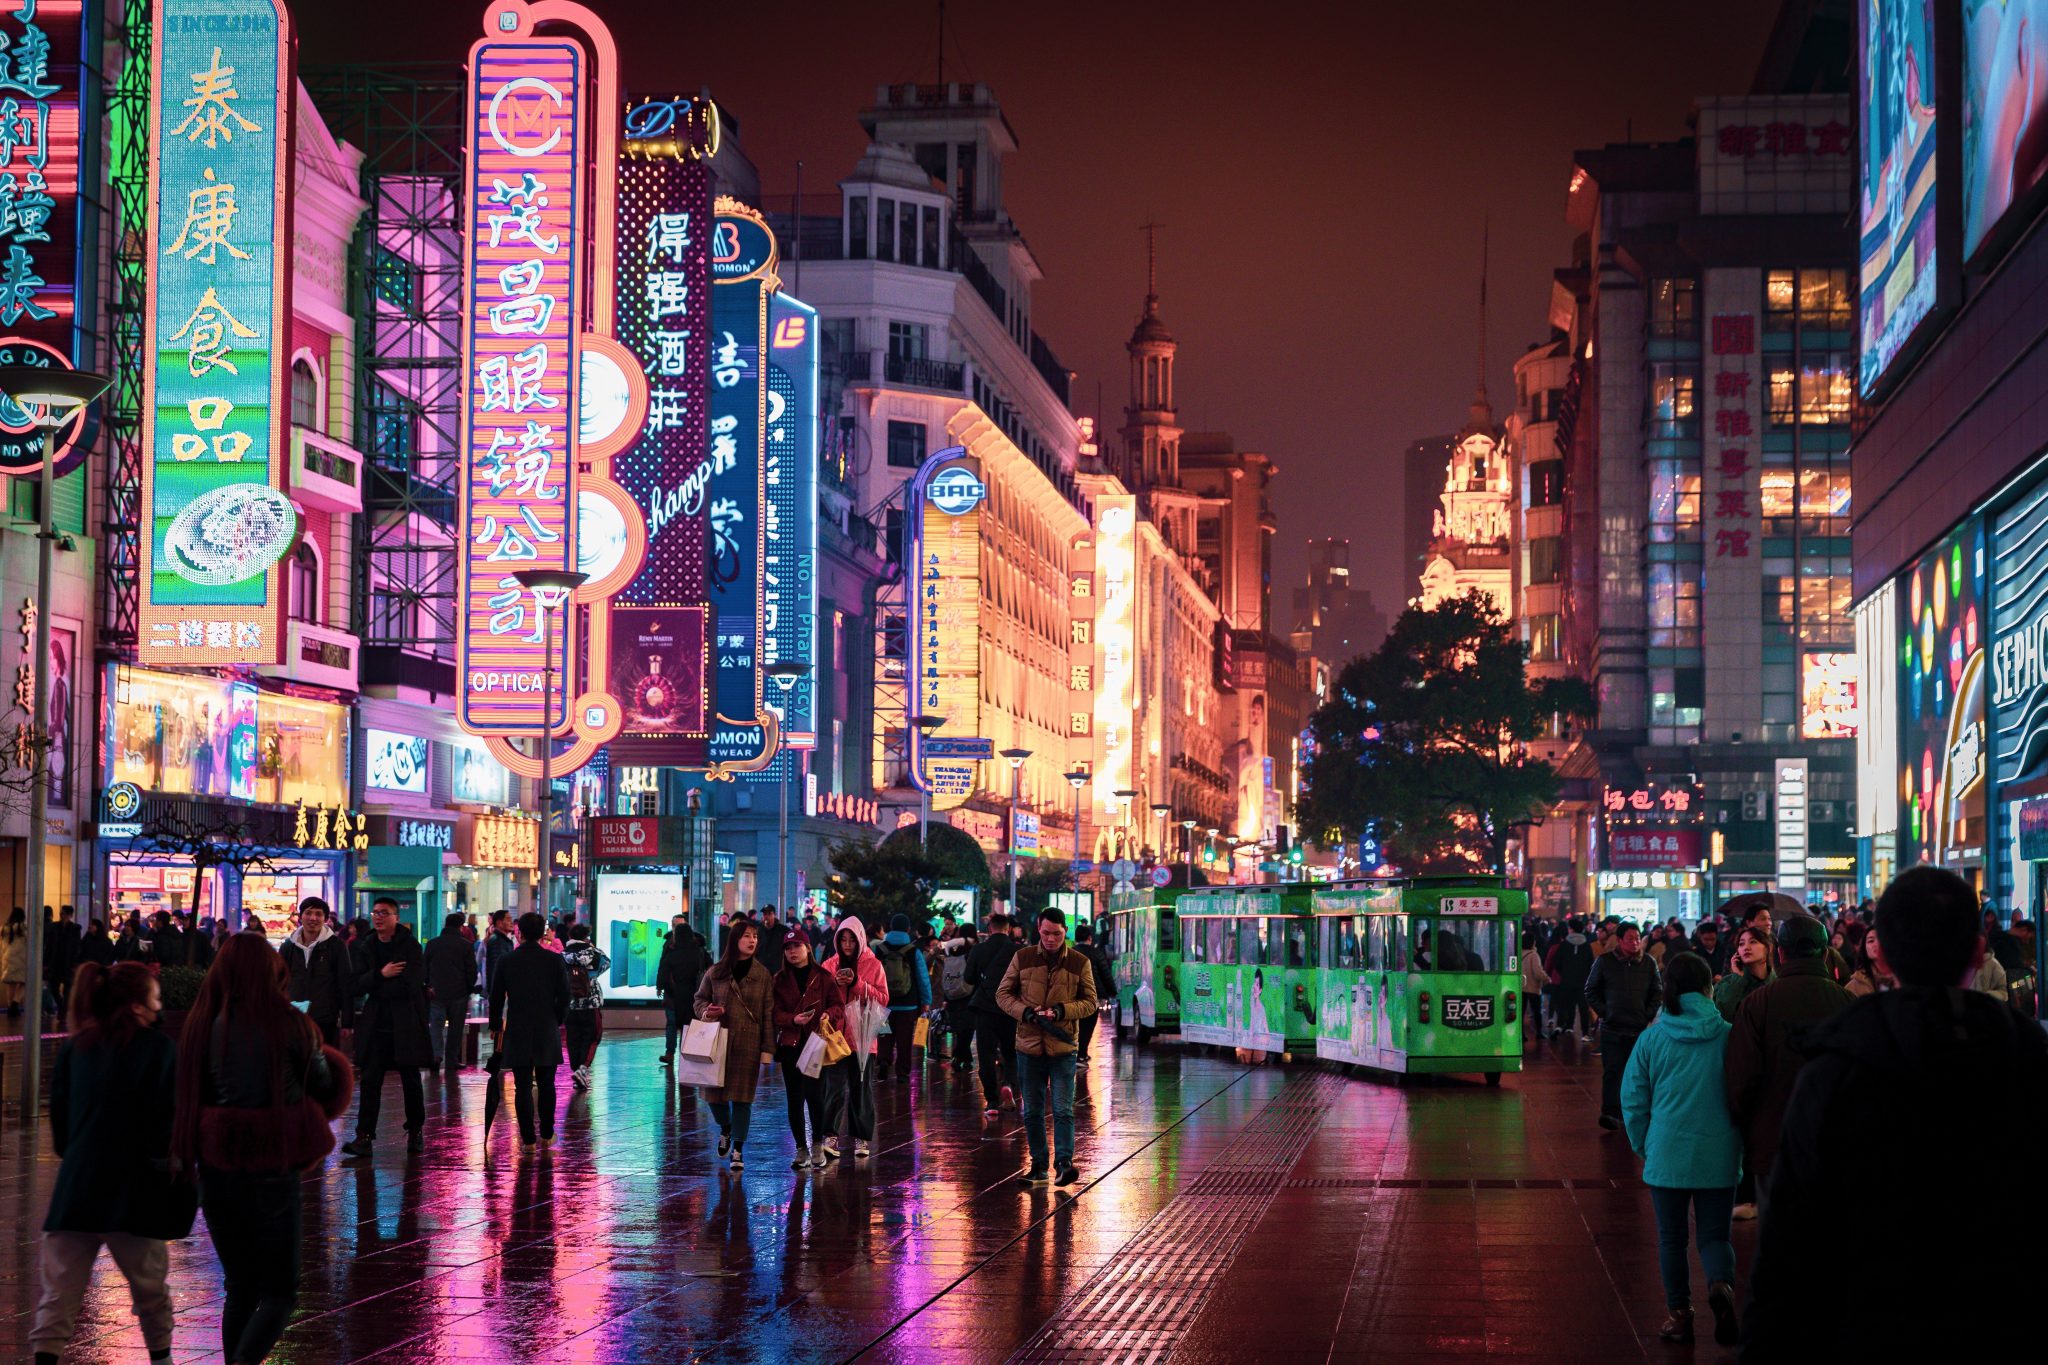 picture of crowded chinese city street at night